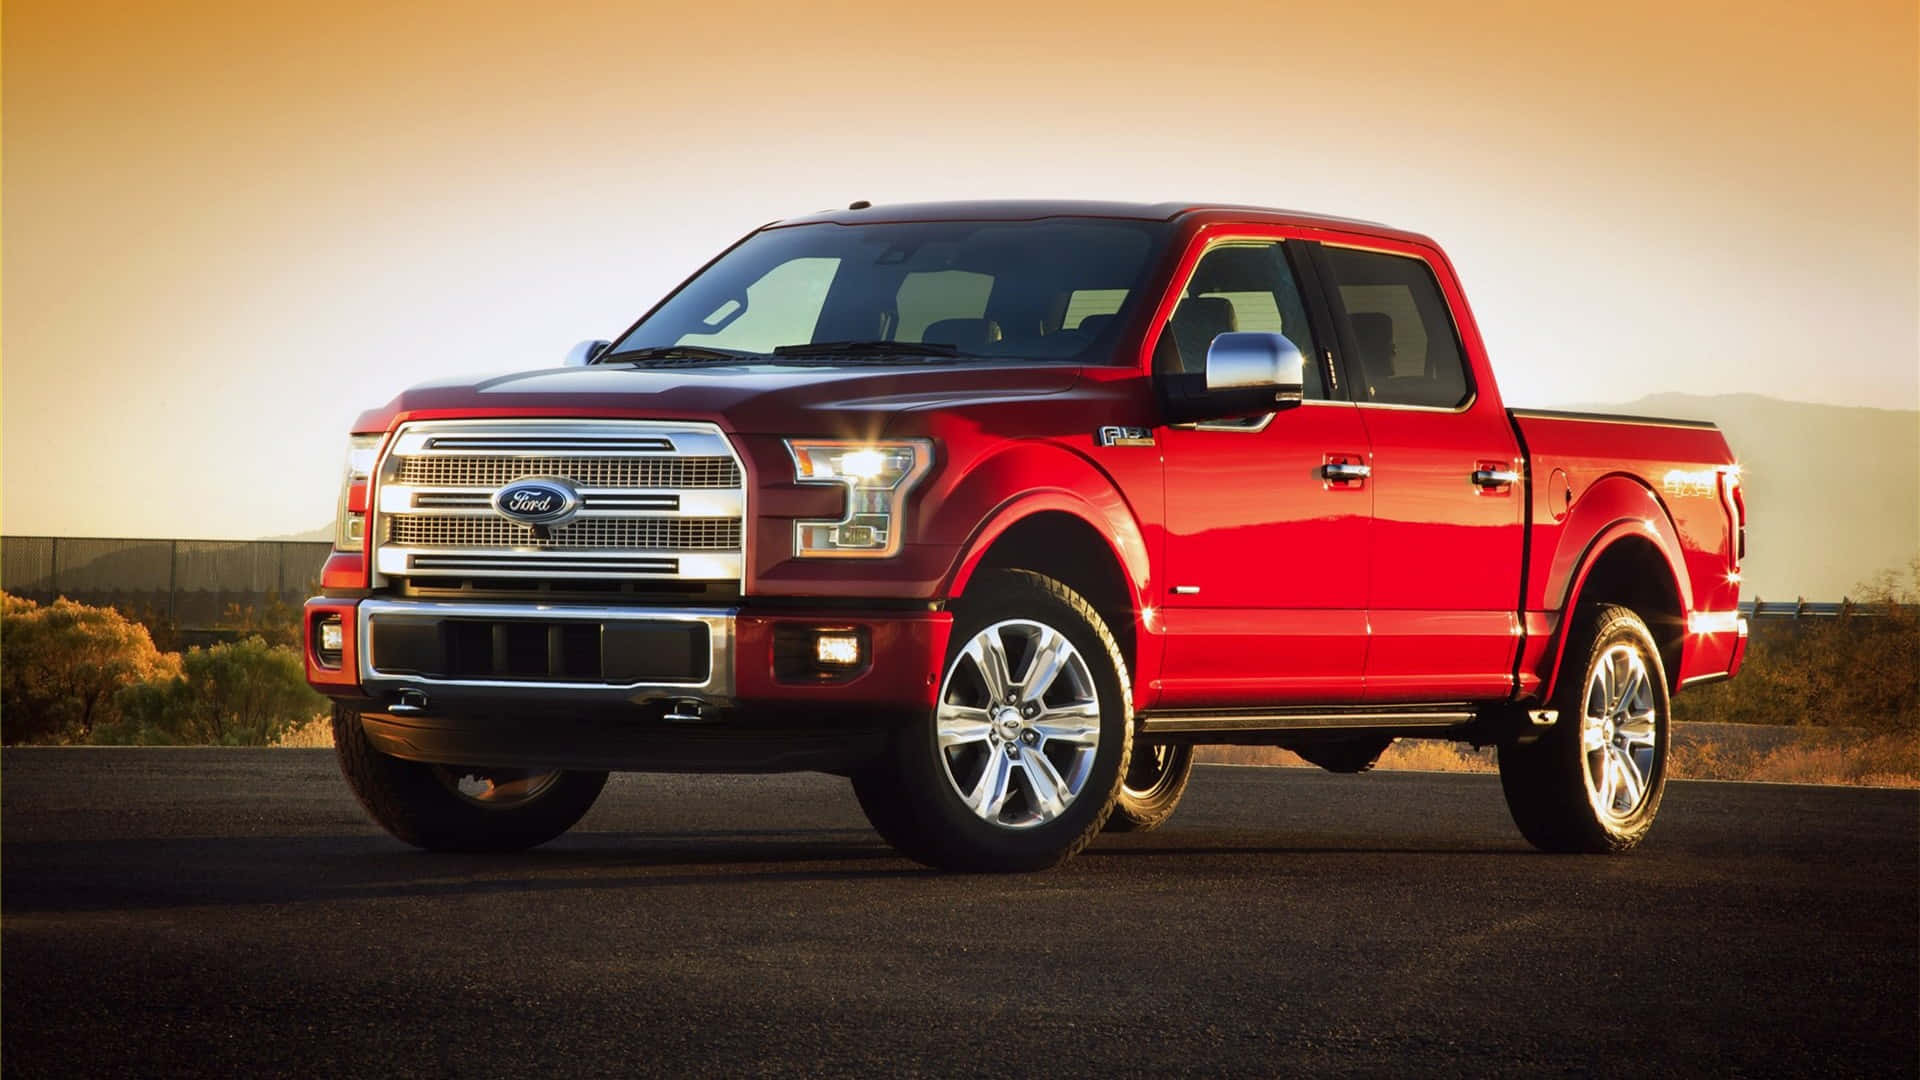 The Red Ford F - 150 Is Parked On A Desert Road